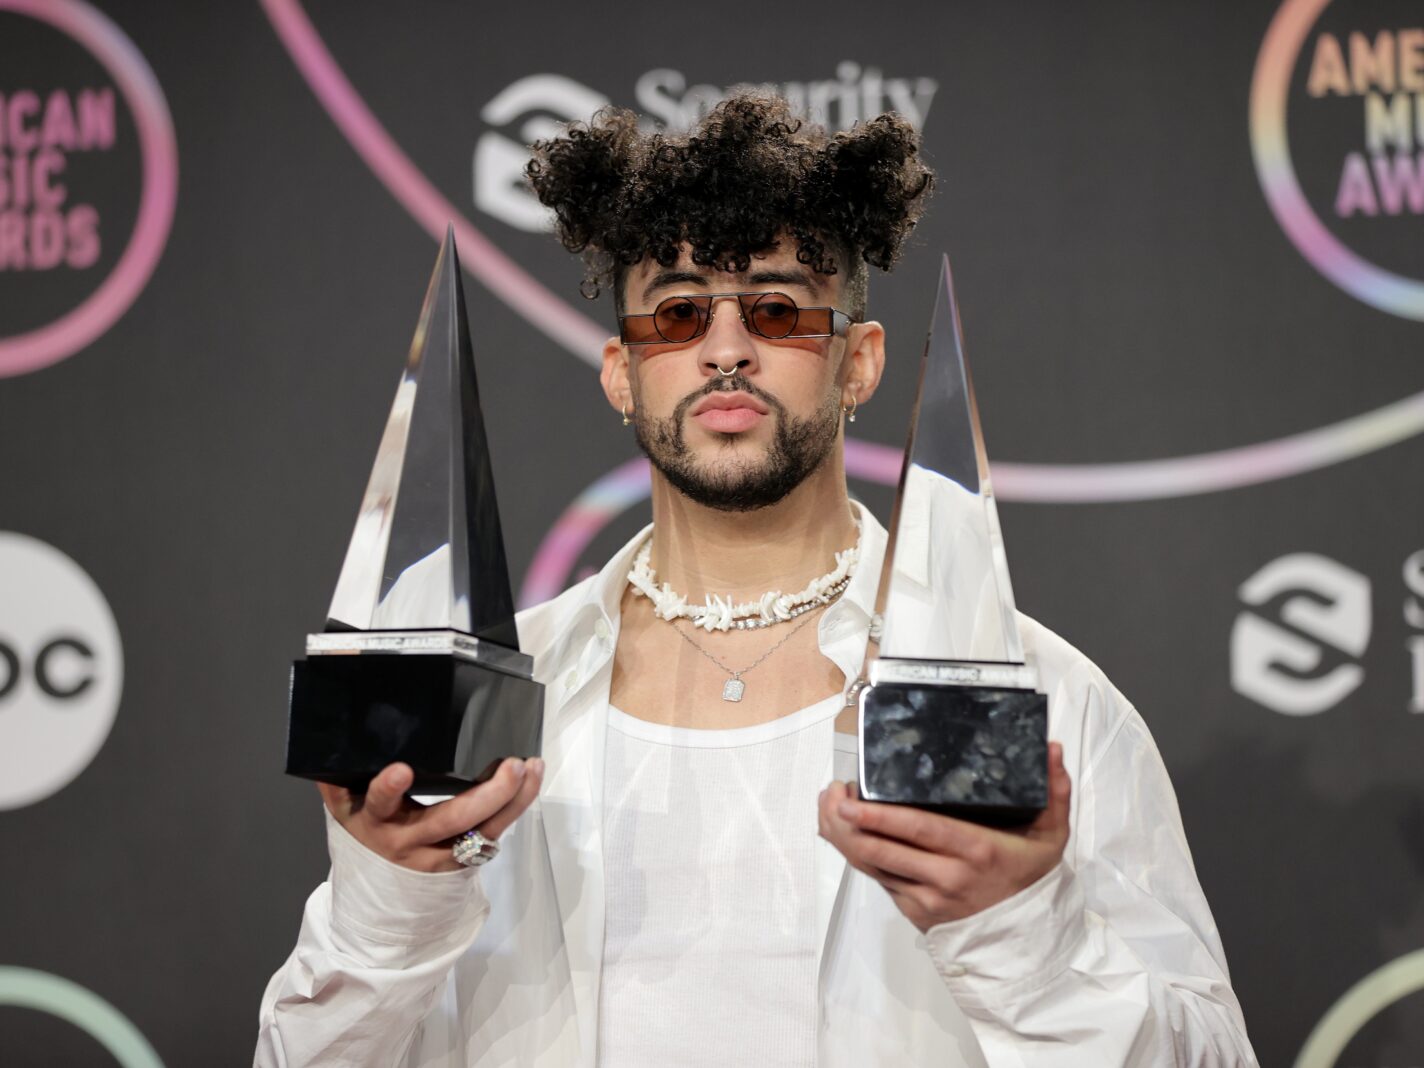 WATCH: Bad Bunny's Reaction to AMAs Reporter Is a Whole Mood